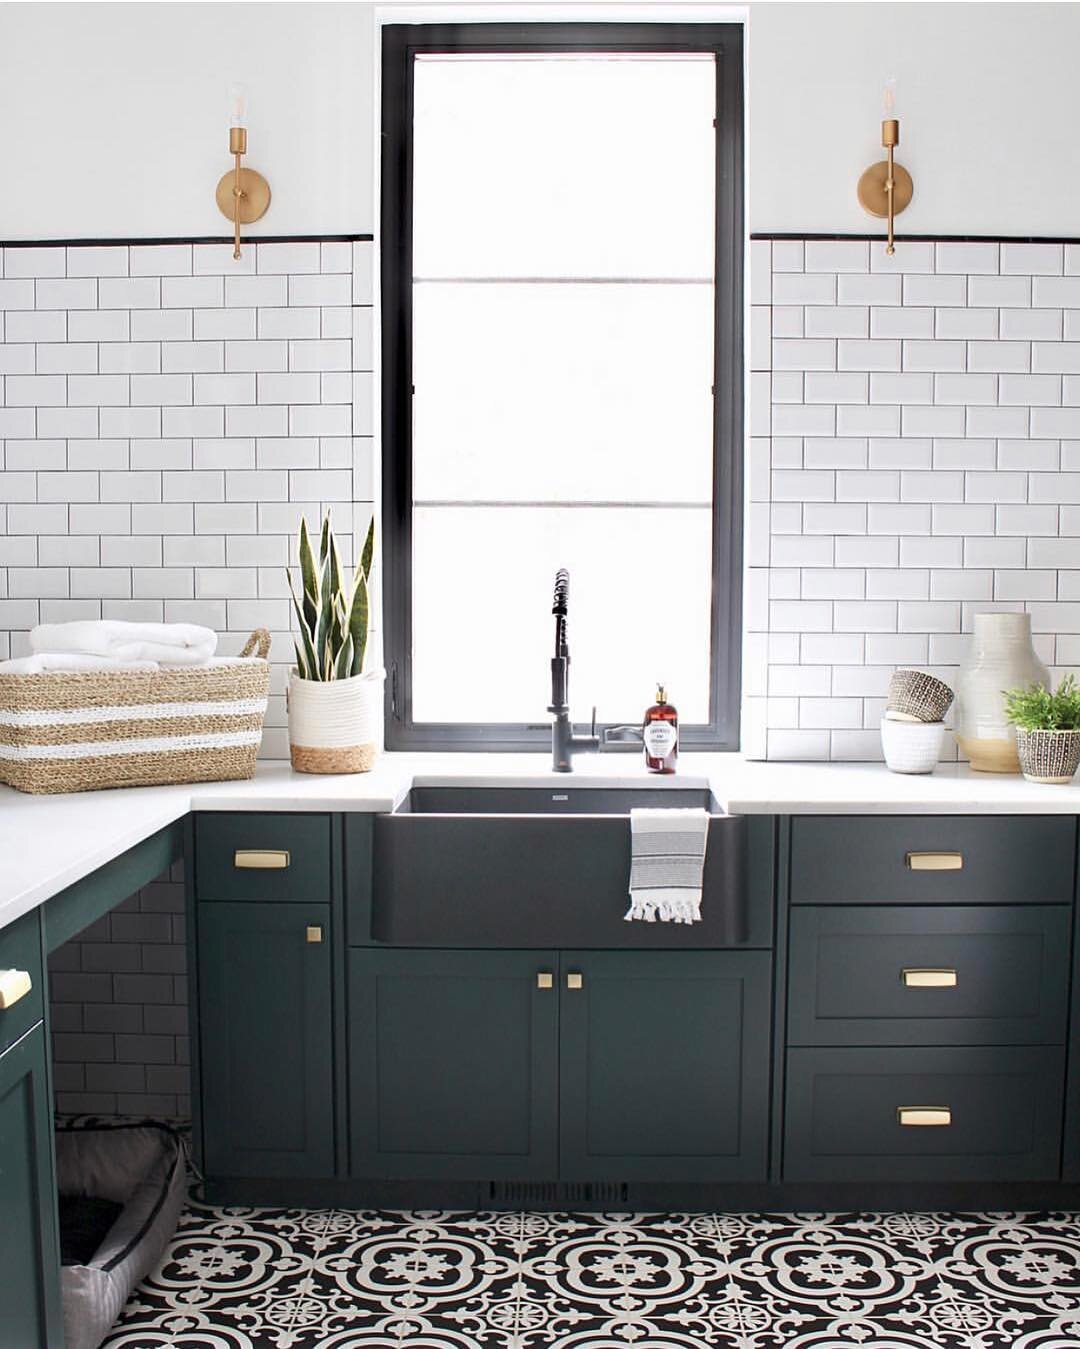 How do you feel about the black sink? We love it! Eclectic touches like these add tons of personality to your home!